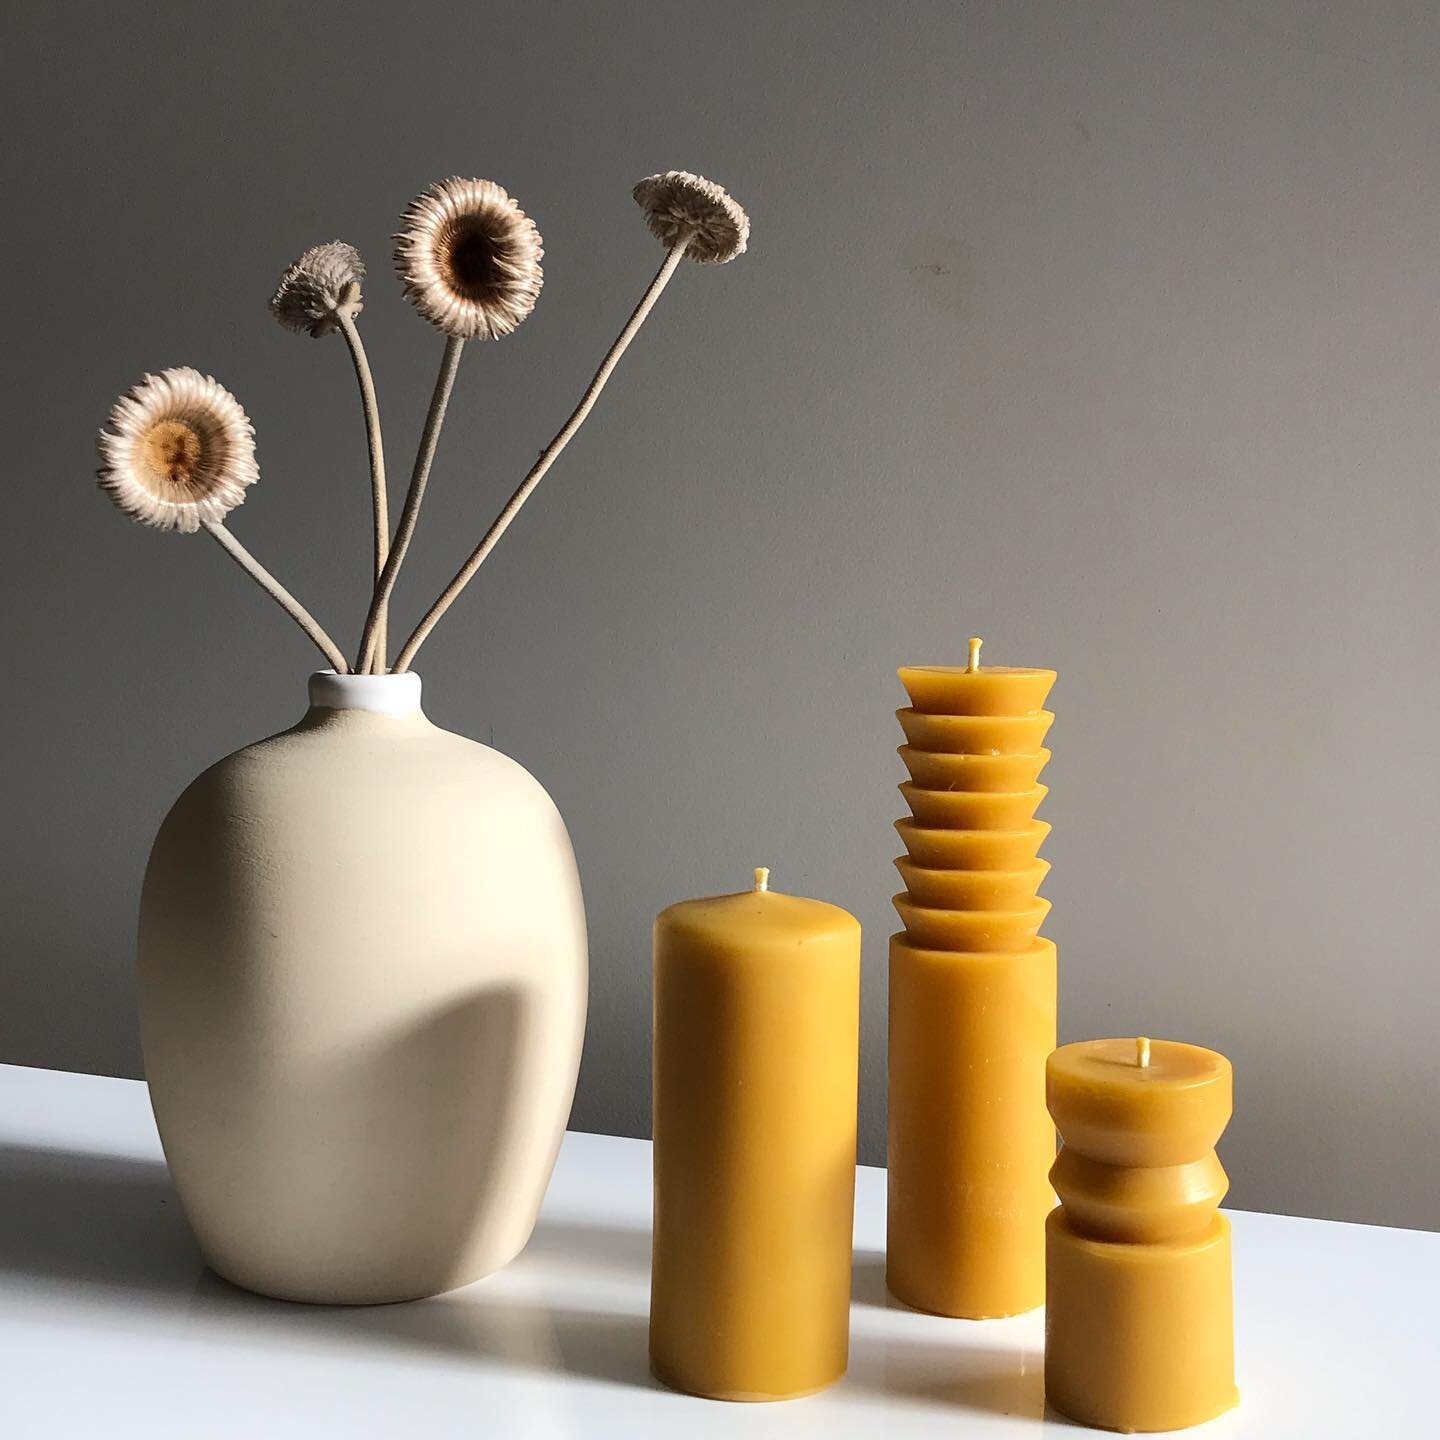 These candles 😍😍😍

Handcrafted and beautiful.
And 100% beeswax 🧡💛🧡

Pop in if you&rsquo;d like to grab some or order via email. 

#beeswaxcandles #beeswaxlove
#madeinraglan 
#raglancollabs #steinerinspired 
#womeninbusiness 
#nzmade
#handmadenz